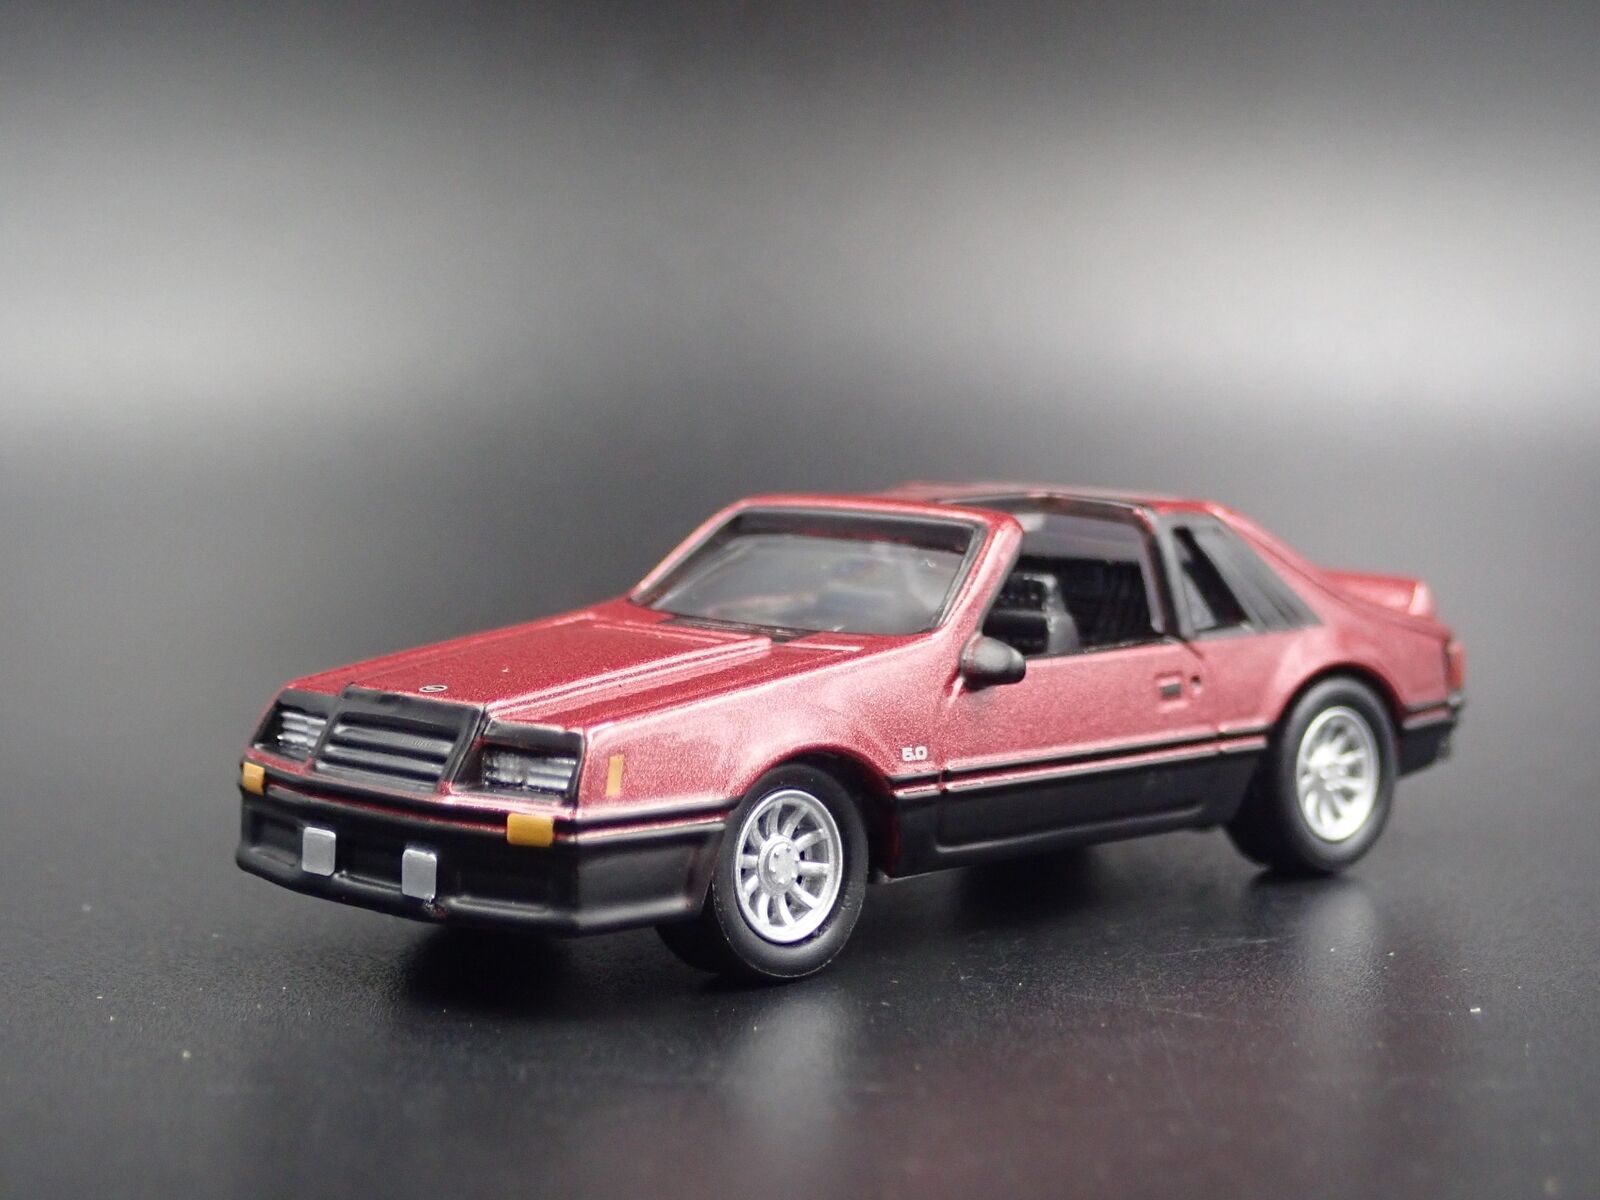 1982 82 FORD MUSTANG GT 5.0 FOX BODY 1:64 SCALE COLLECTIBLE DIECAST MODEL CAR